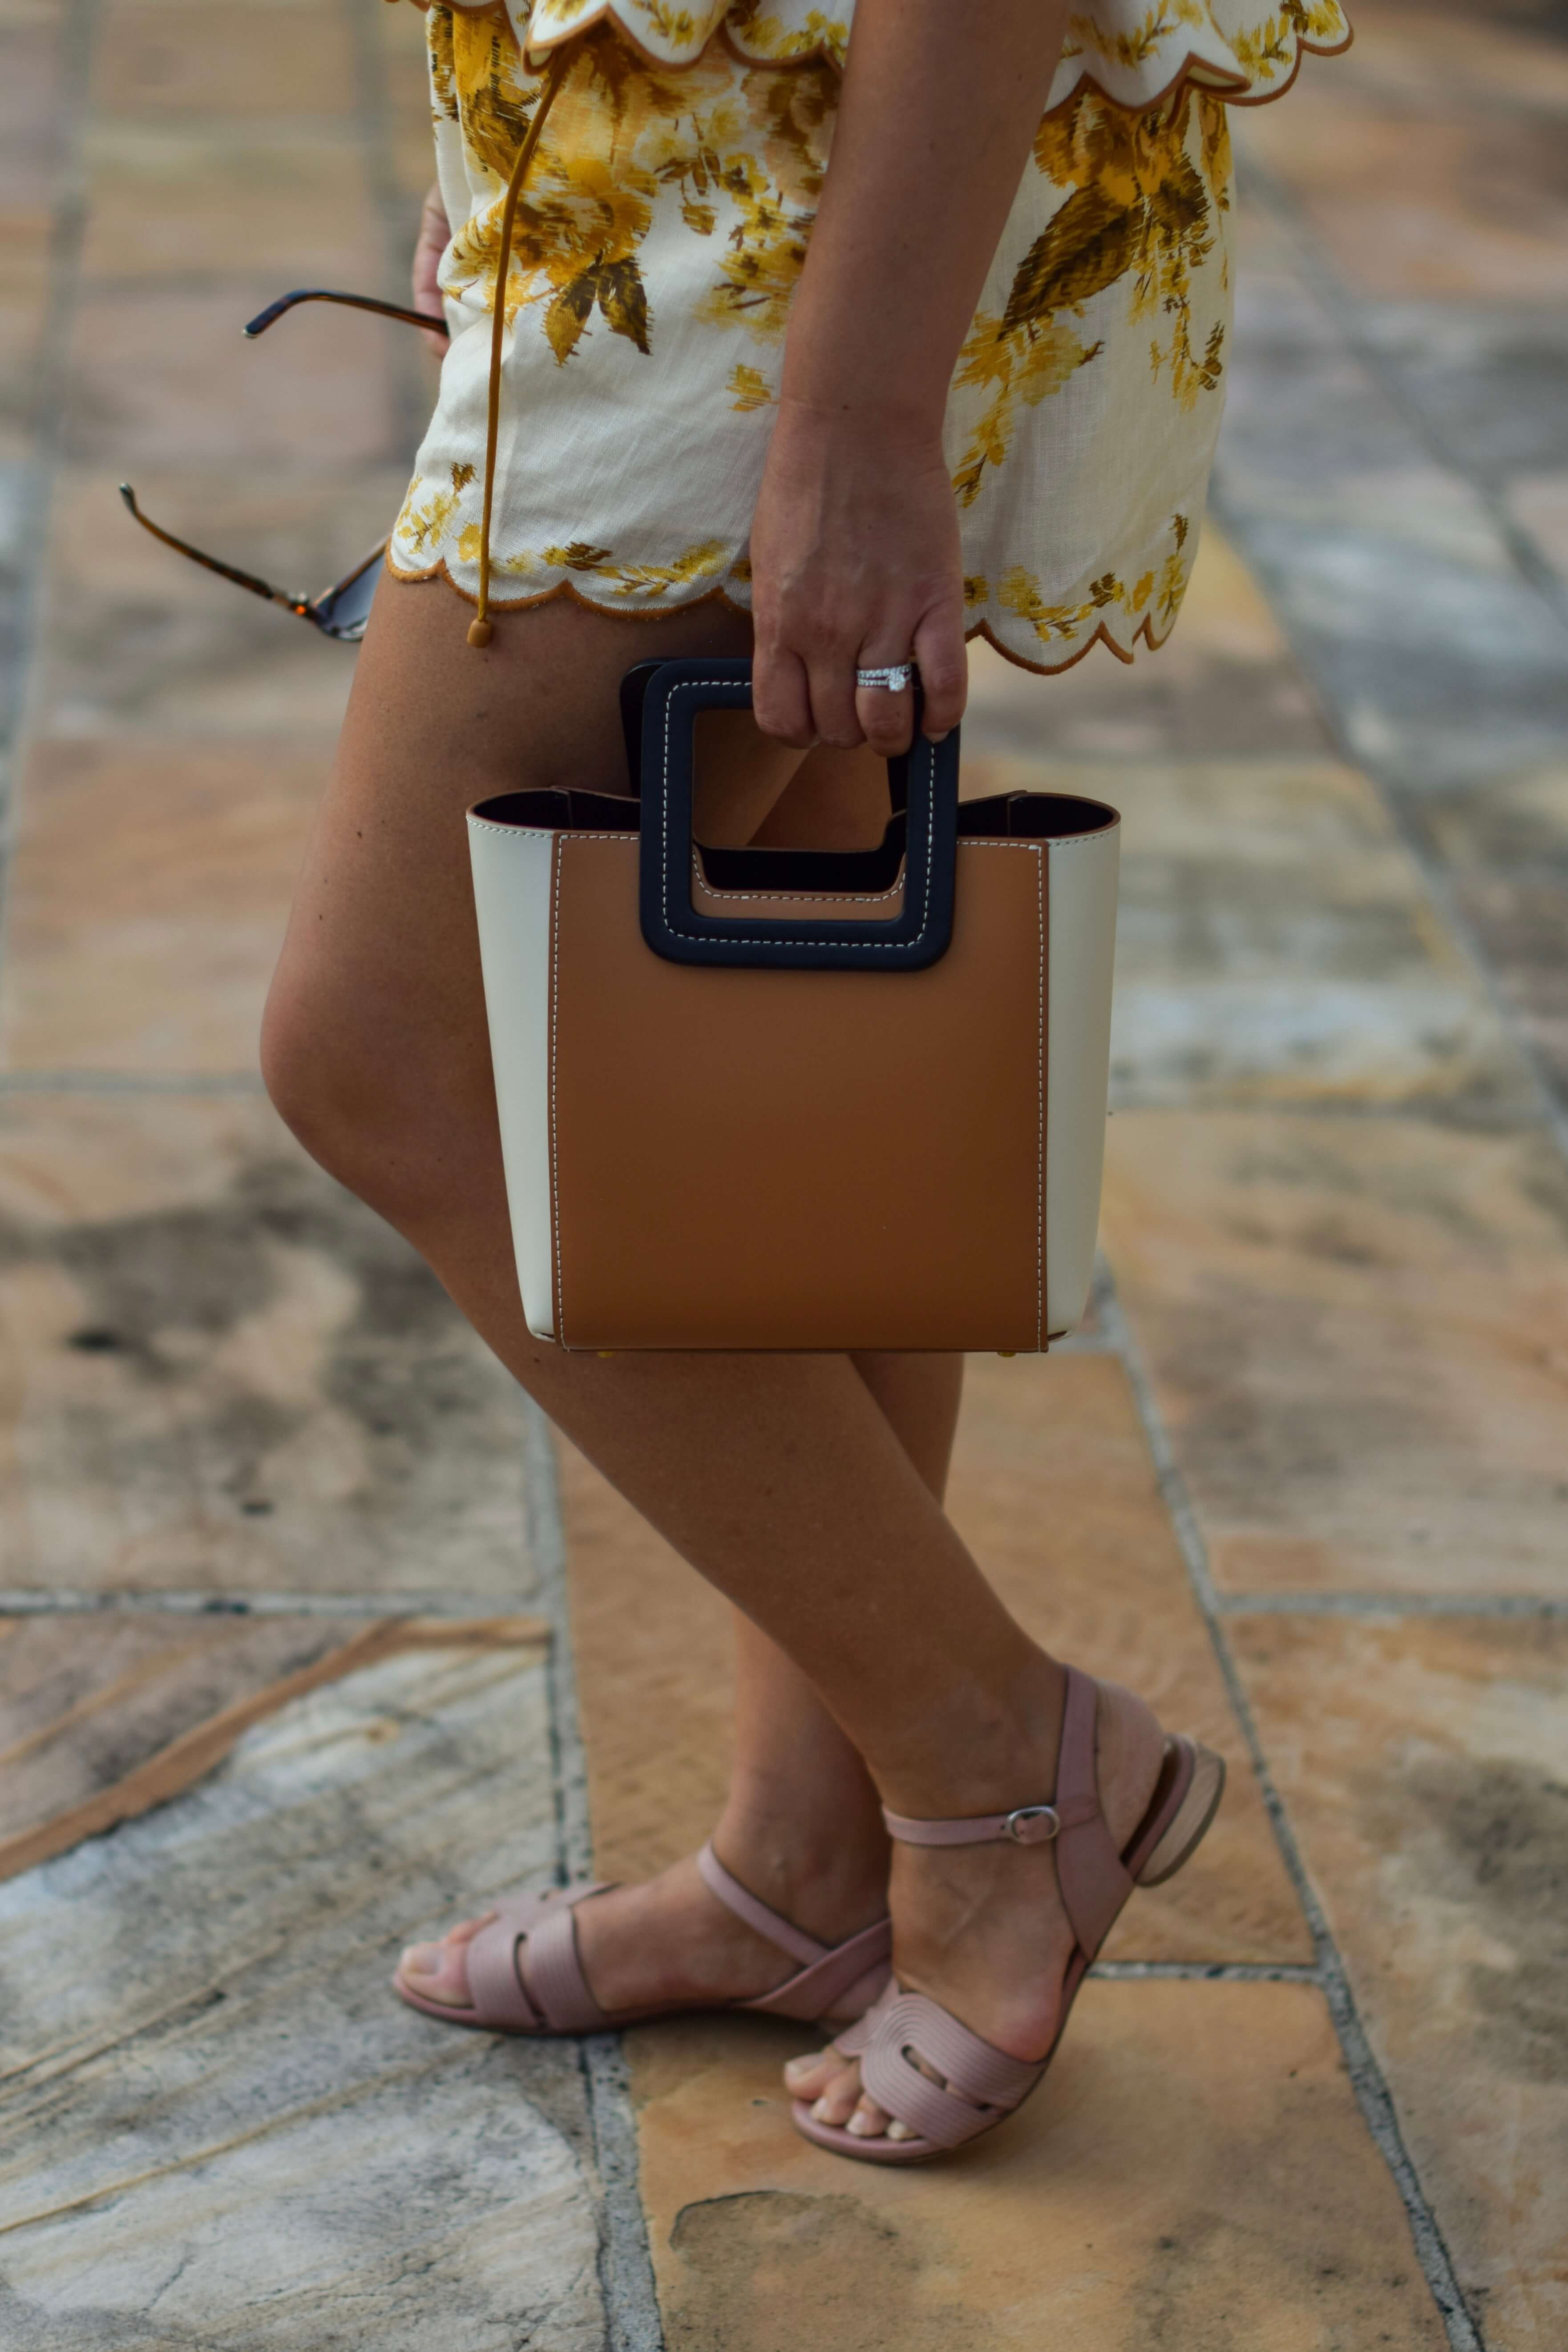 Zimmermann Top and Shorts Coclico Shoes Staud Bag Outfit by Modnitsa Styling